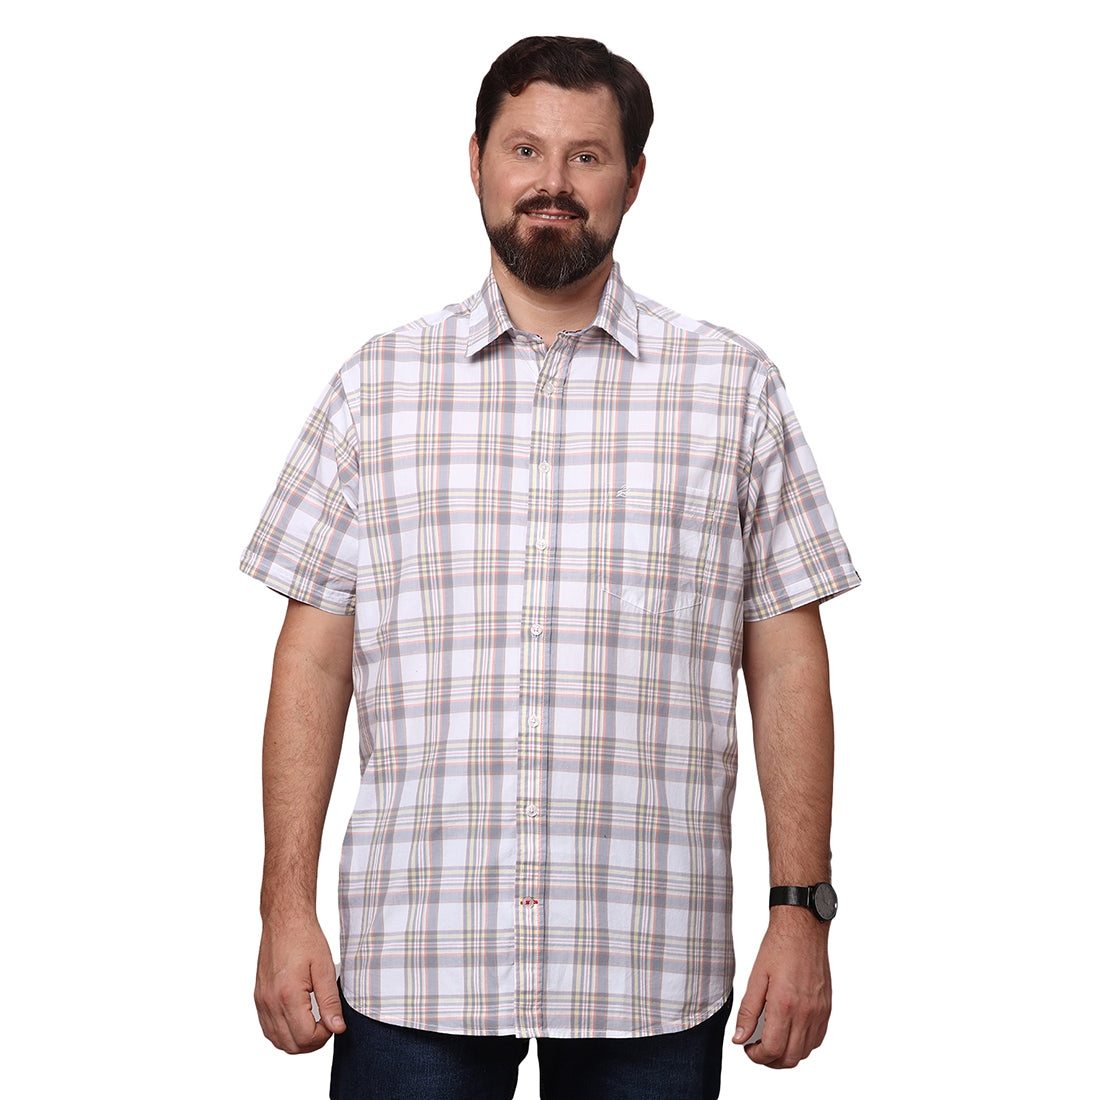 Big & Bold Checks Cream Half Sleeves Slim Fit Casual Shirts (Plus Size) - Double Two